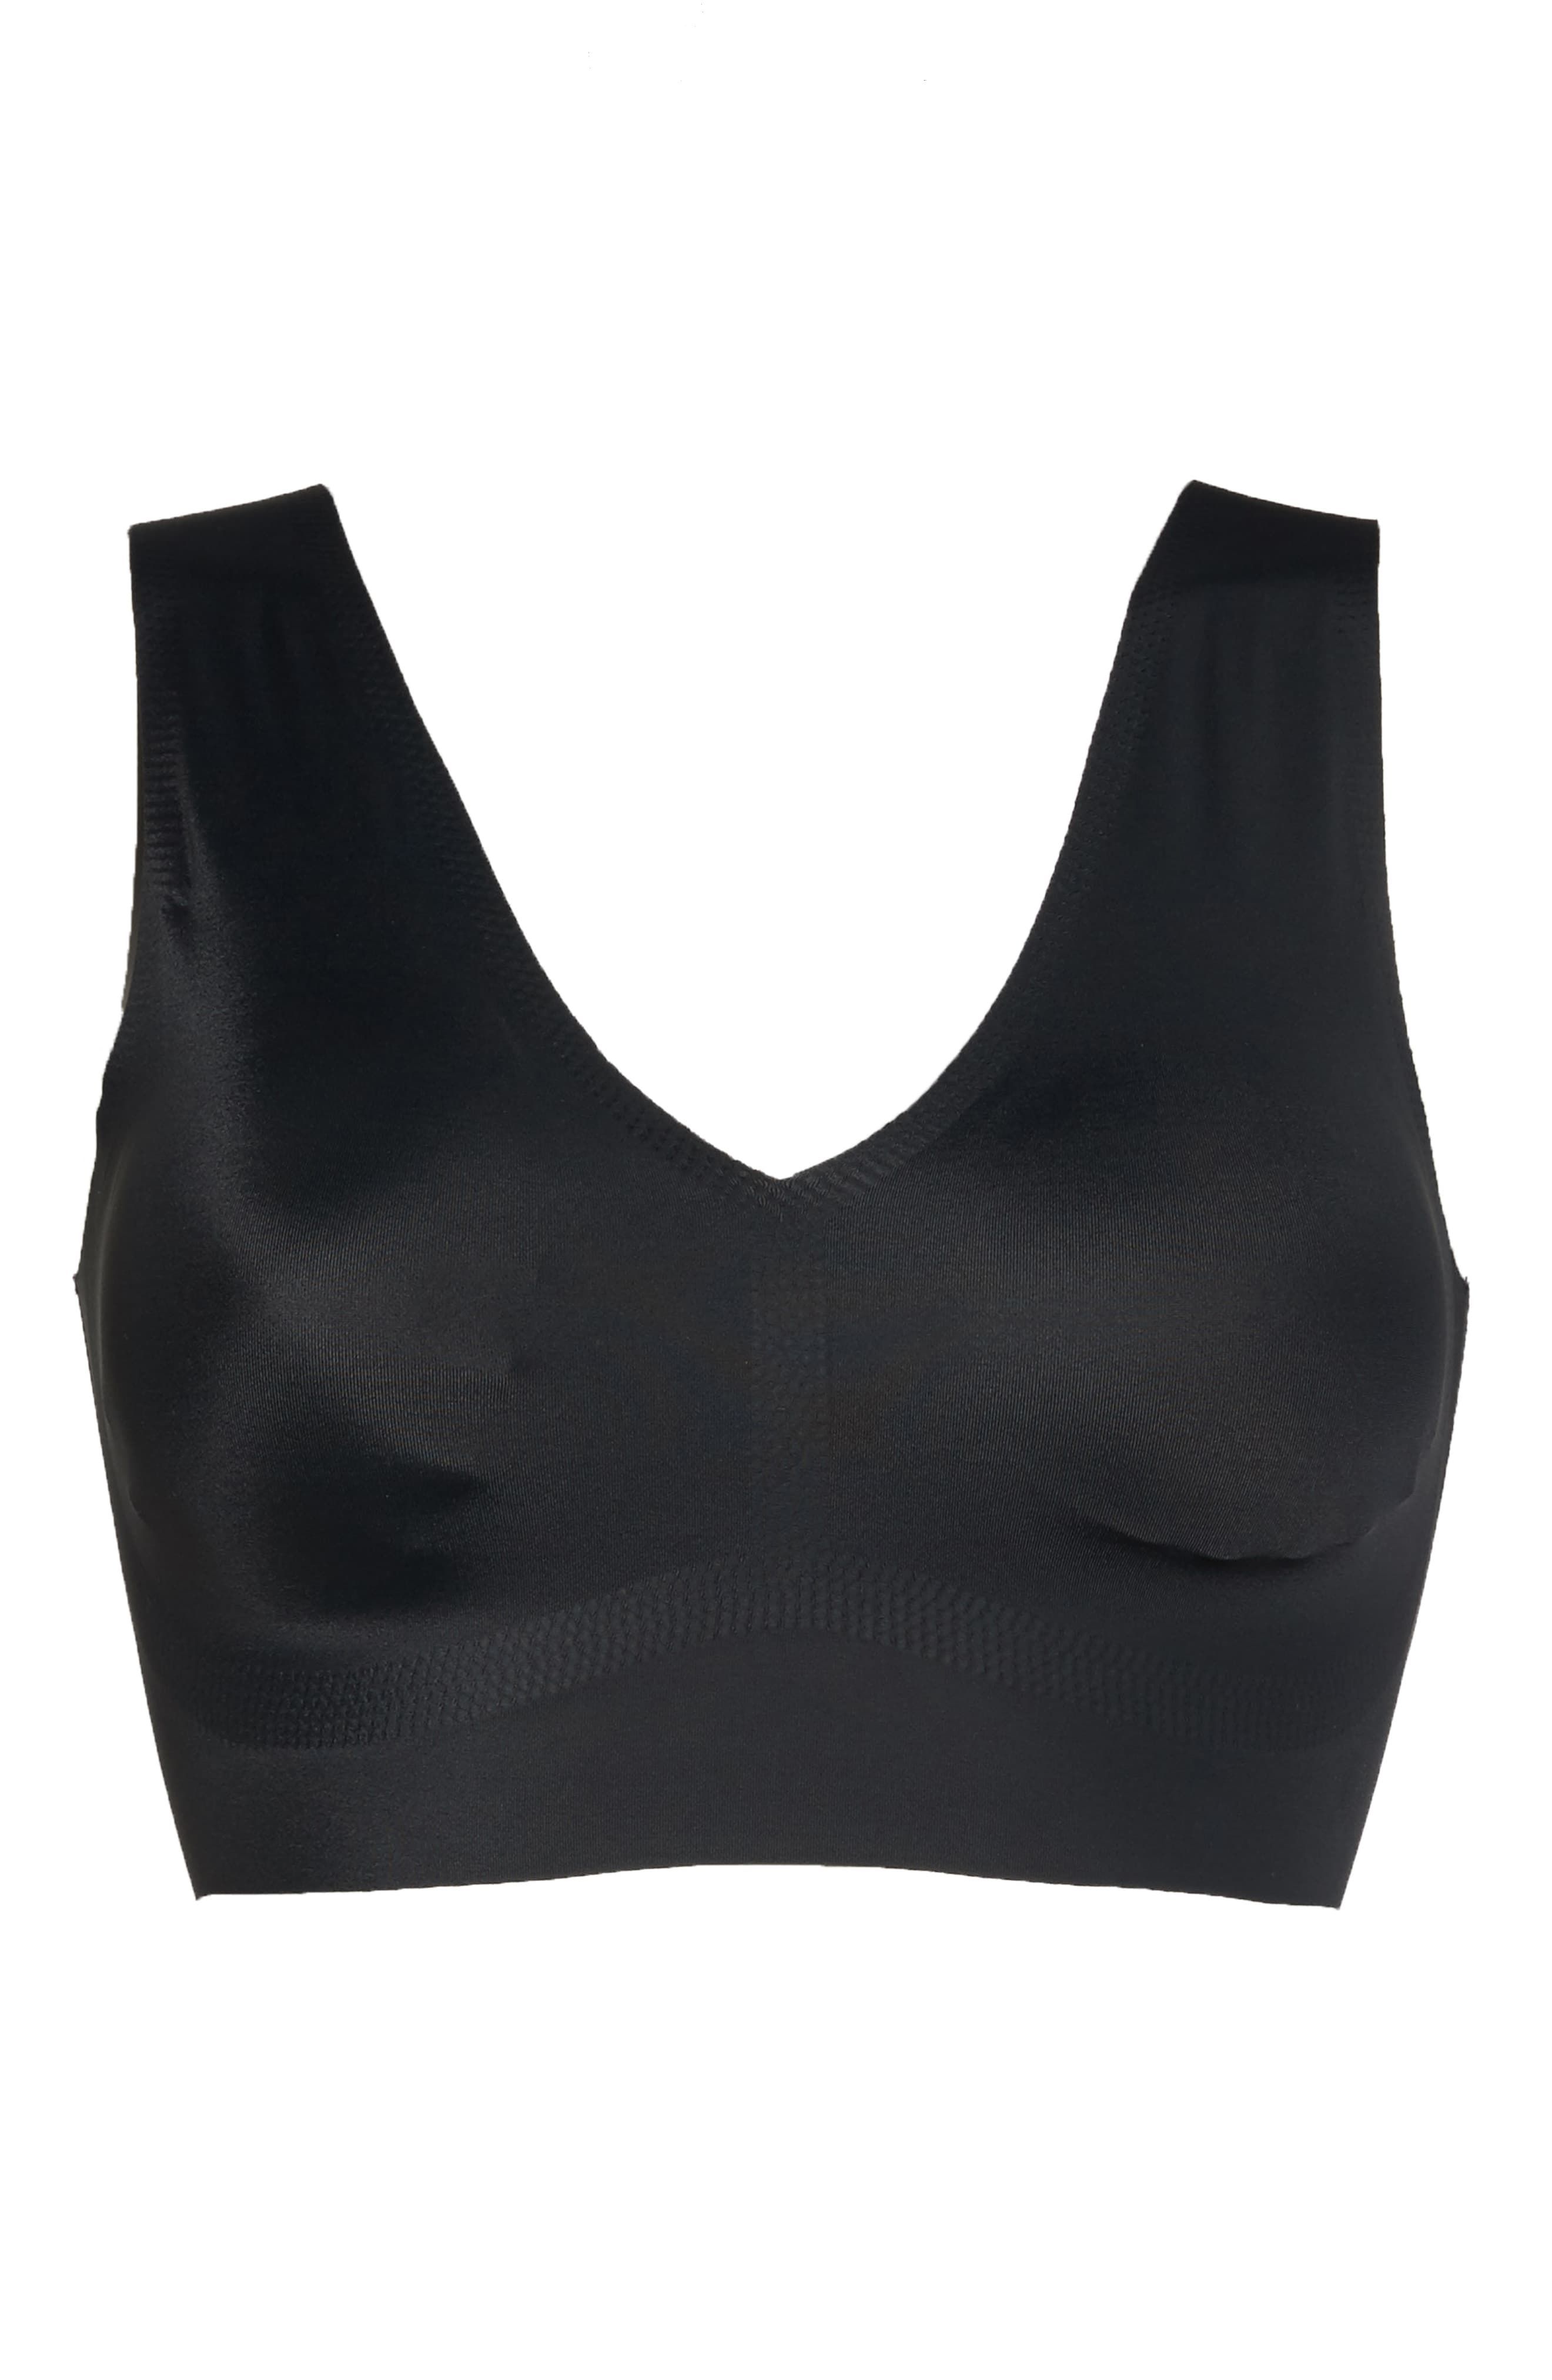 good support bras without underwire